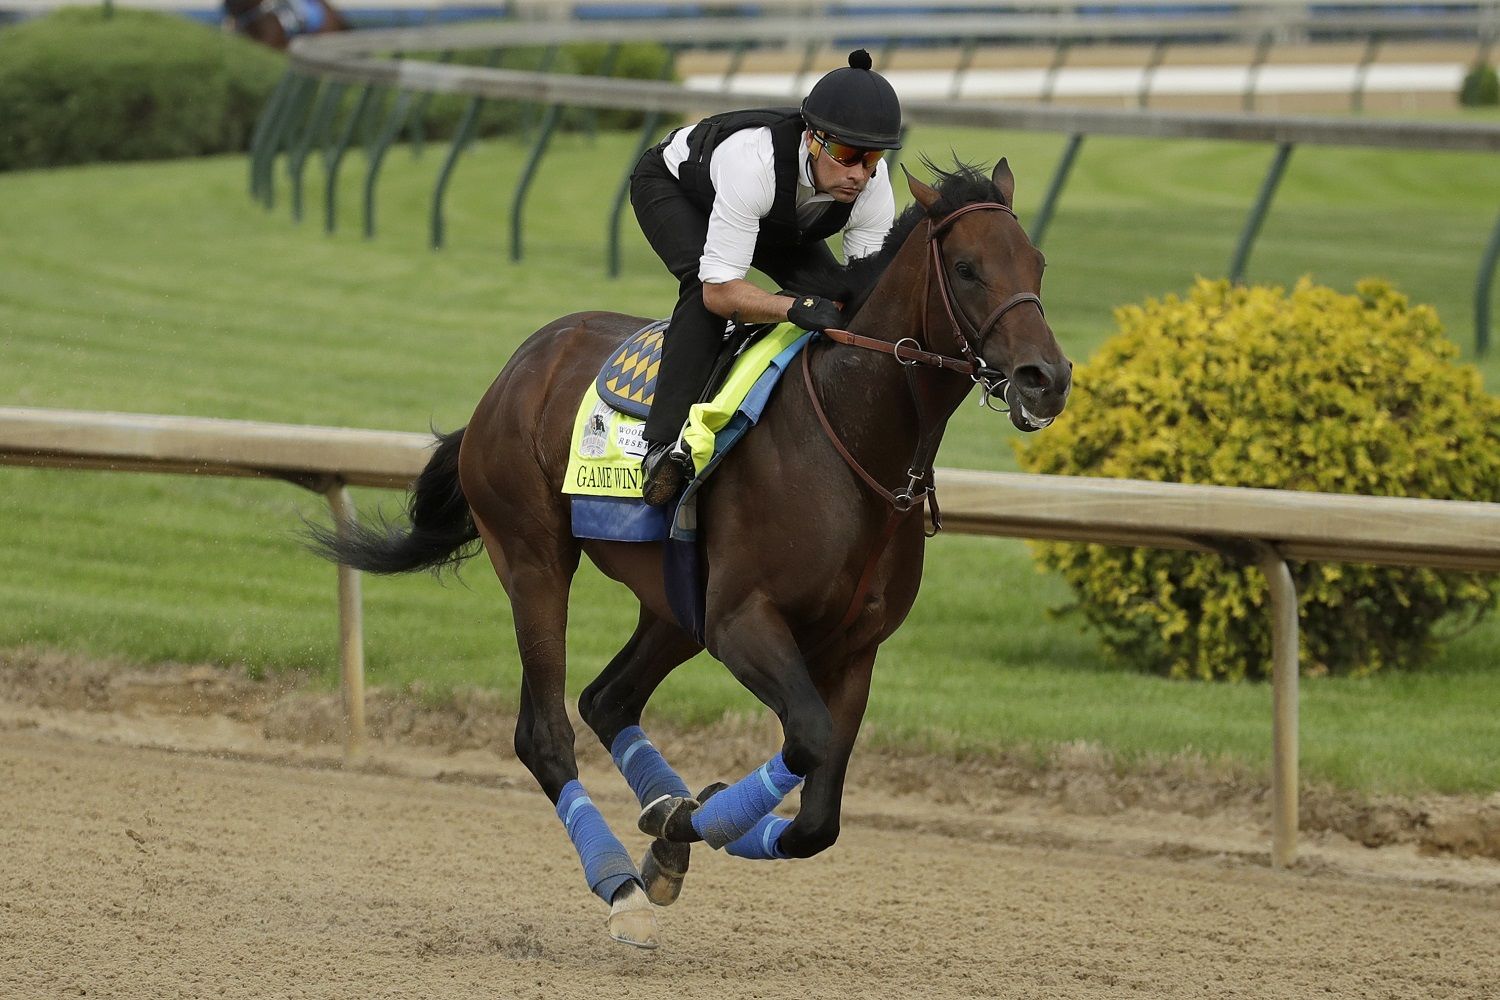 Kentucky Derby entrant Game Winner is ridden during a workout at Churchill Downs Wednesday, May 1, 2019, in Louisville, Ky. The 145th running of the Kentucky Derby is scheduled for Saturday, May 4. (AP Photo/Charlie Riedel)